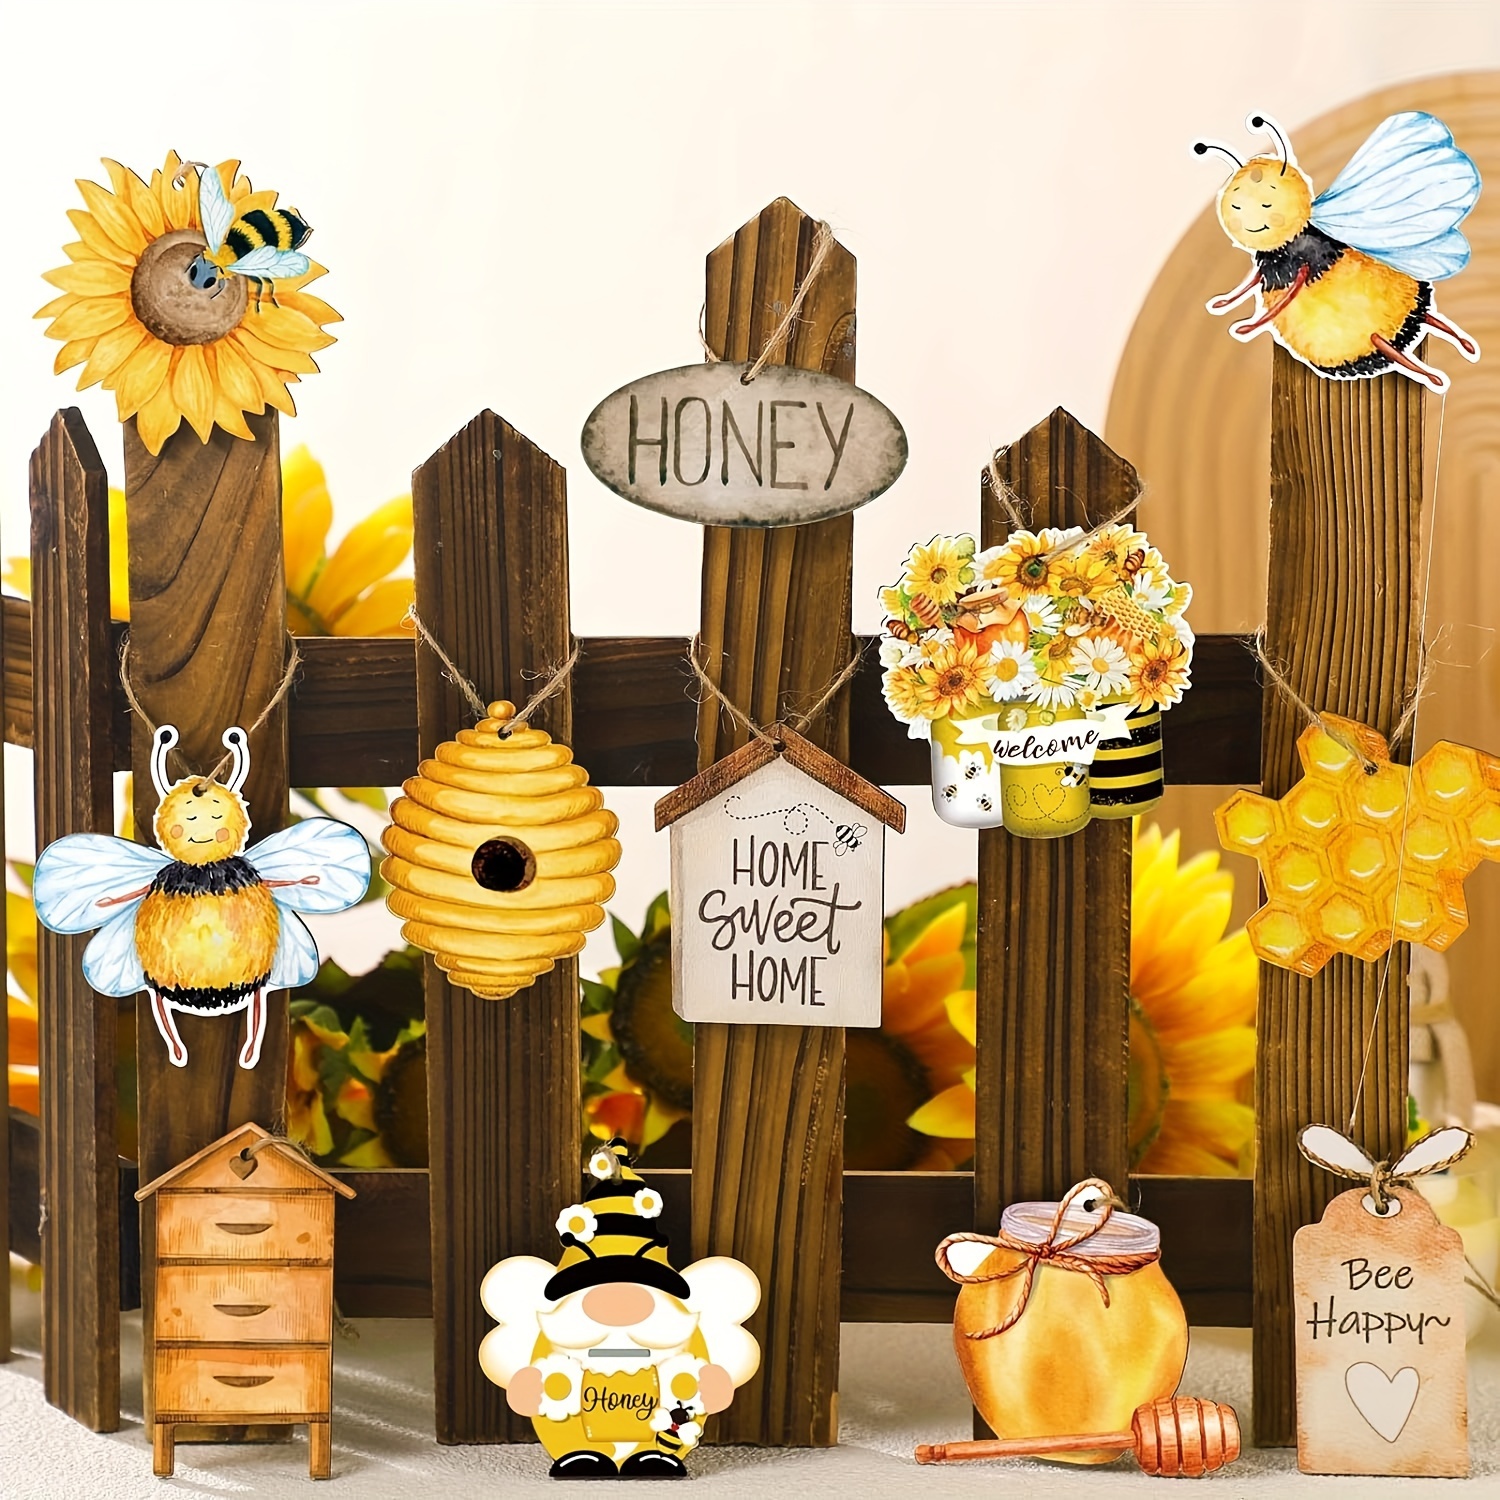 

12-pack Classic Bee Gnome Wood Ornaments - Animal Themed Hanging Decorations For Summer, Birthday & Friendship Day Celebrations - Juneteenth Friendly Honeybee Shapes With Rope For Home & Party Decor